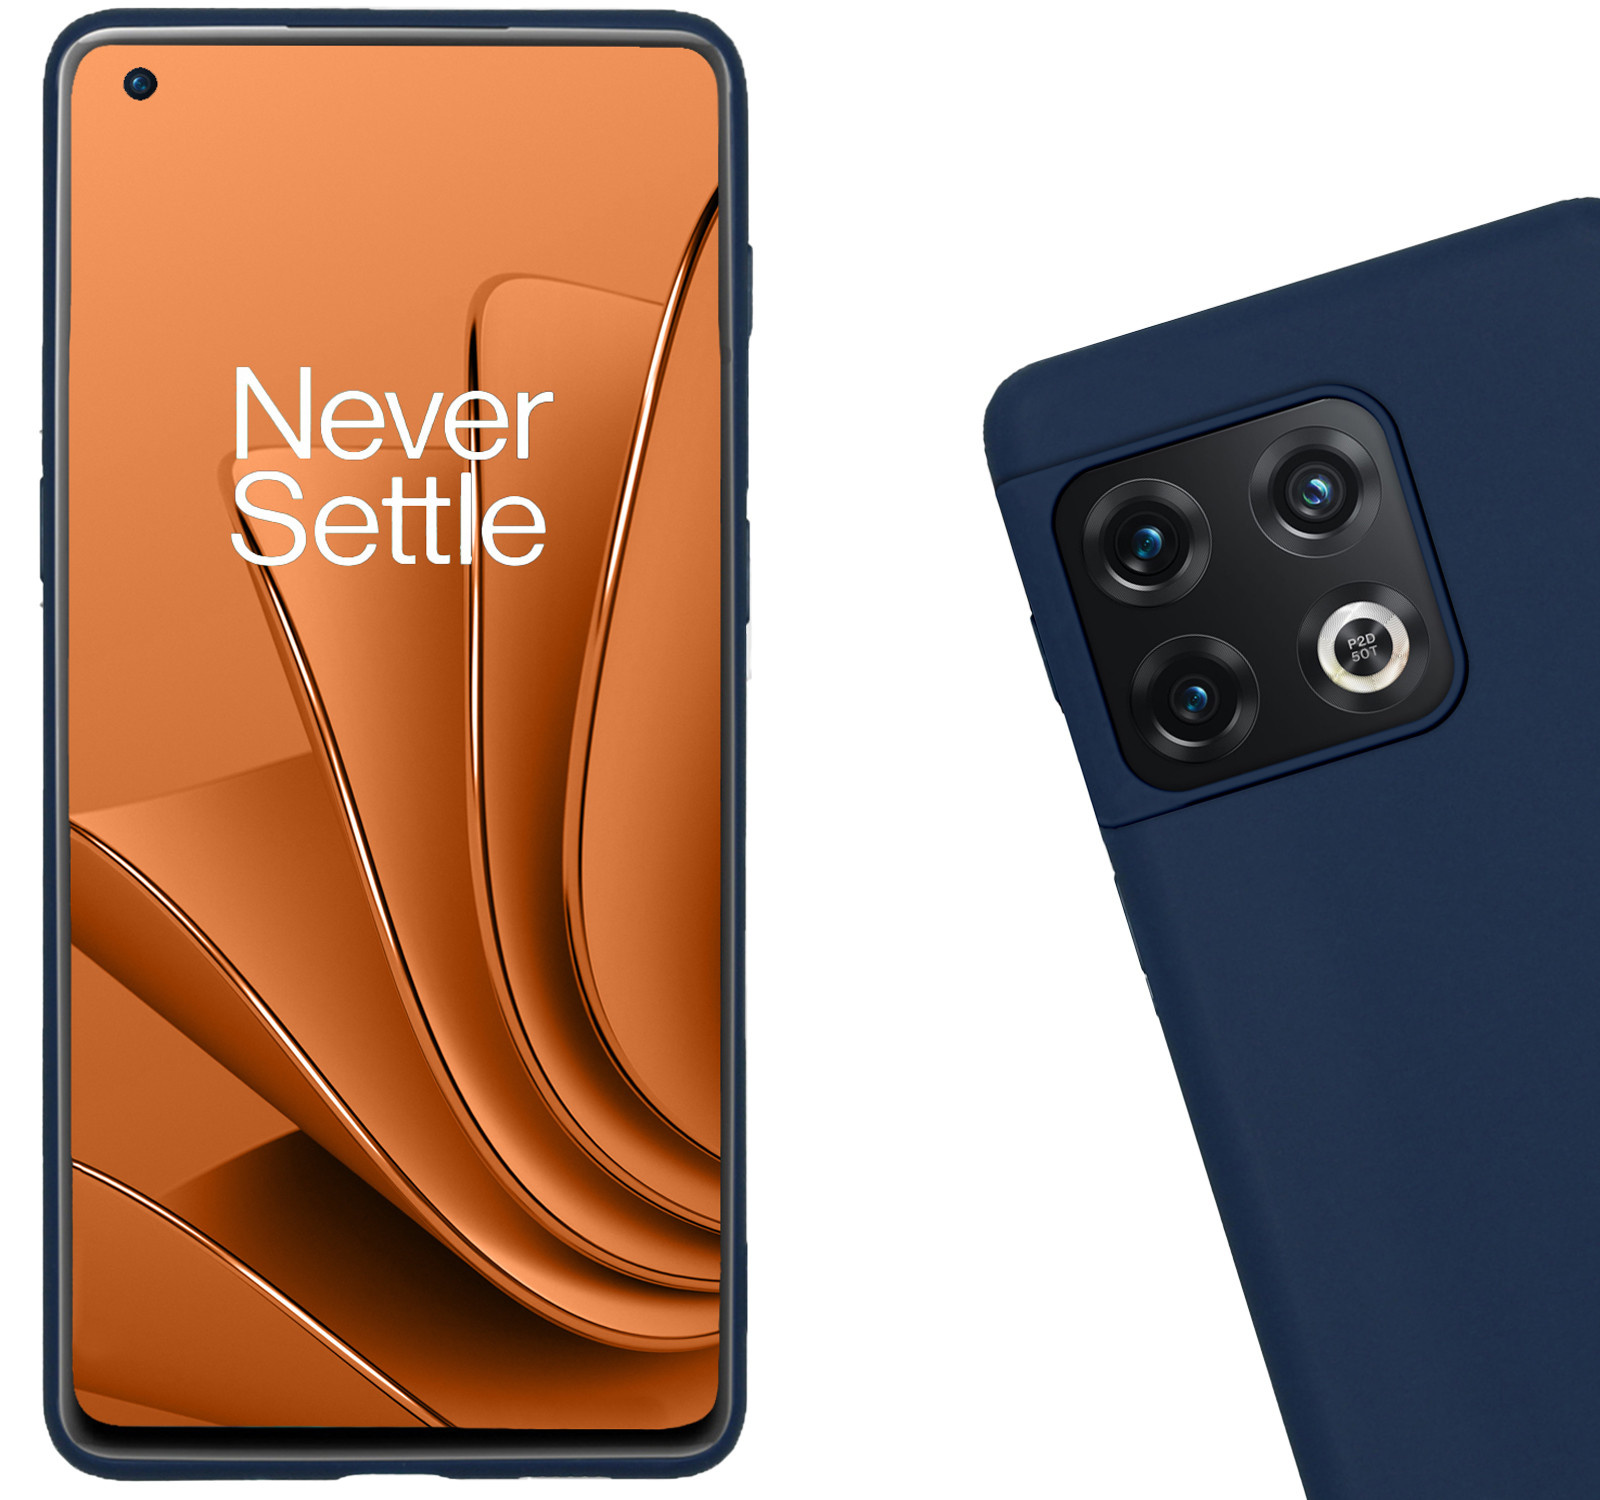 Nomfy OnePlus 10 Pro Hoesje Siliconen - OnePlus 10 Pro Hoesje Donker Blauw Case - OnePlus 10 Pro Cover Siliconen Back Cover -Donker Blauw